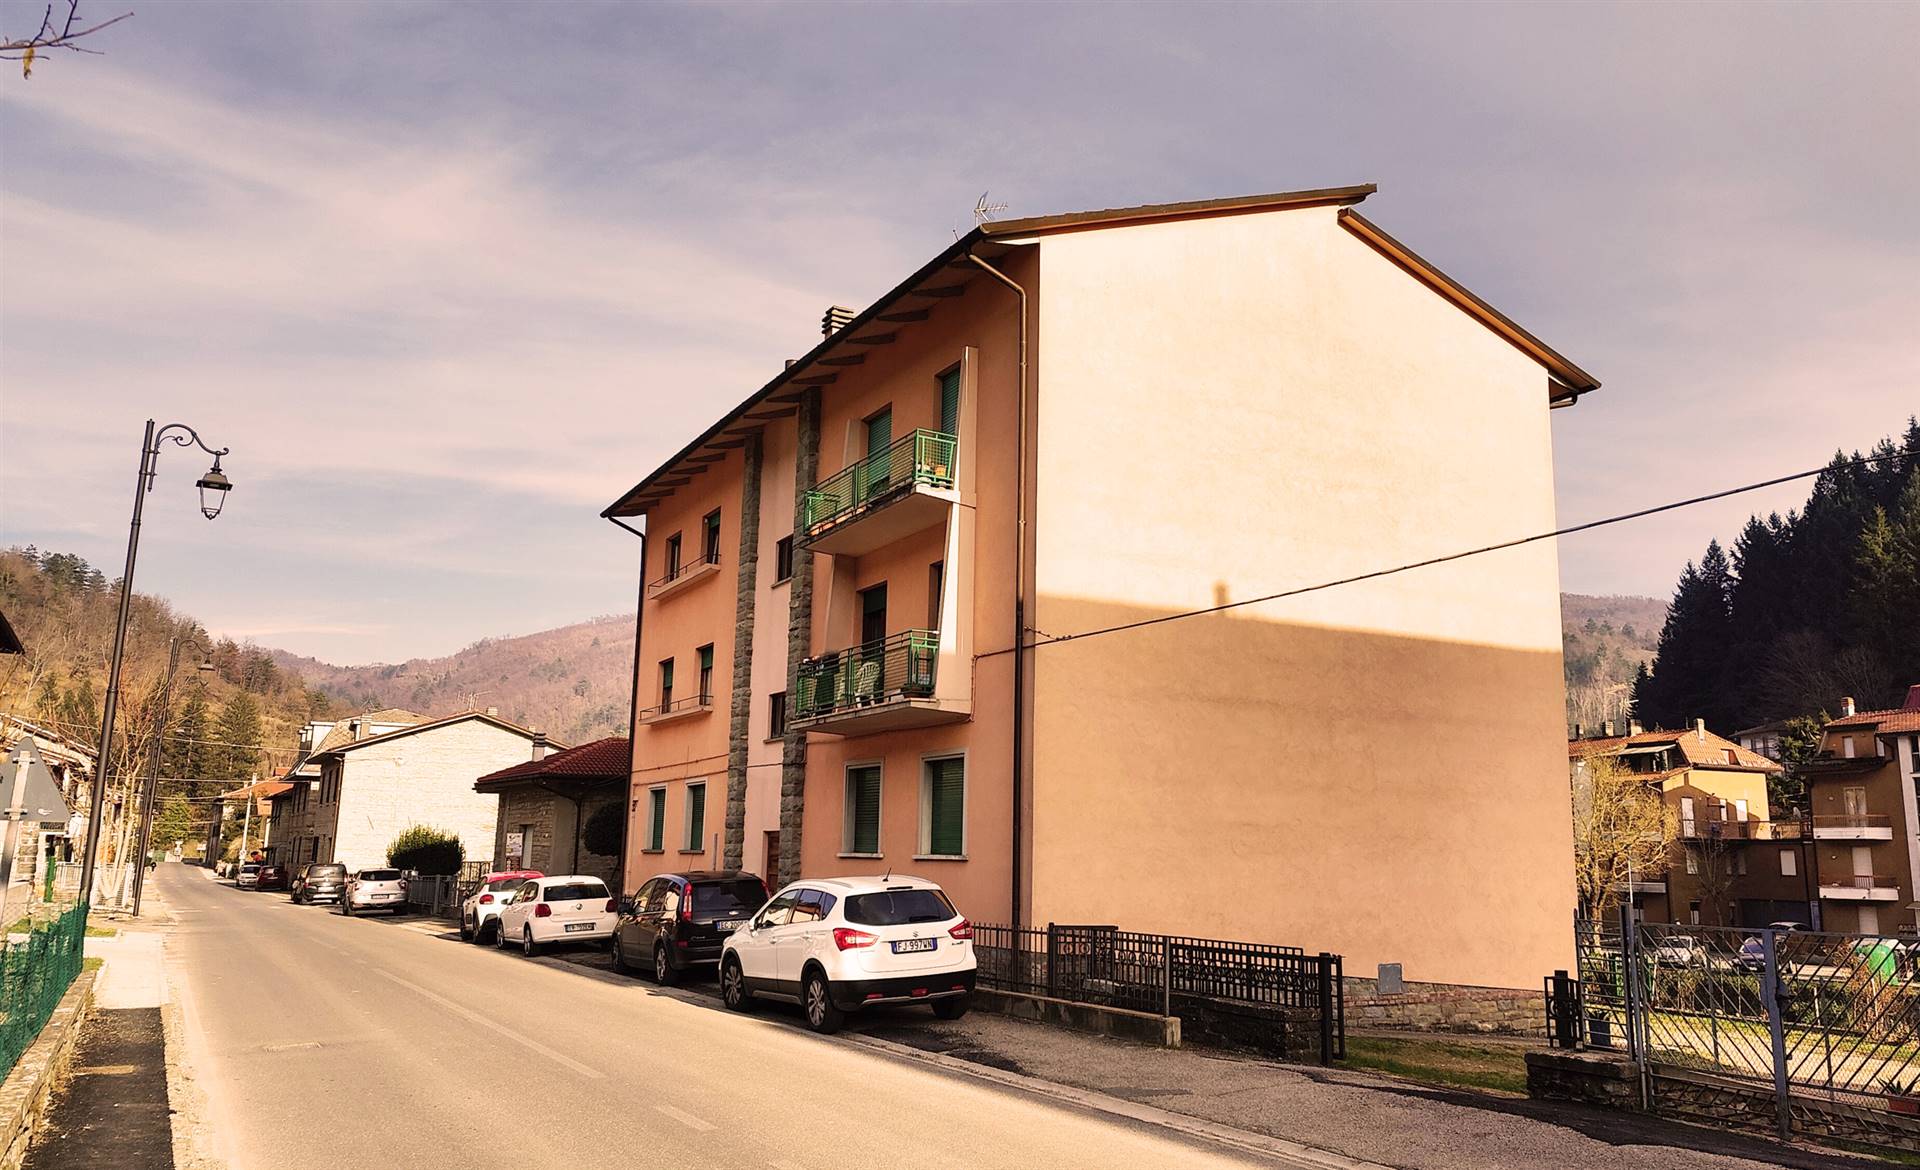 PALAZZUOLO SUL SENIO, Apartment for sale of 96 Sq. mt., Quite good conditions, Heating Individual heating system, Energetic class: G, placed at 